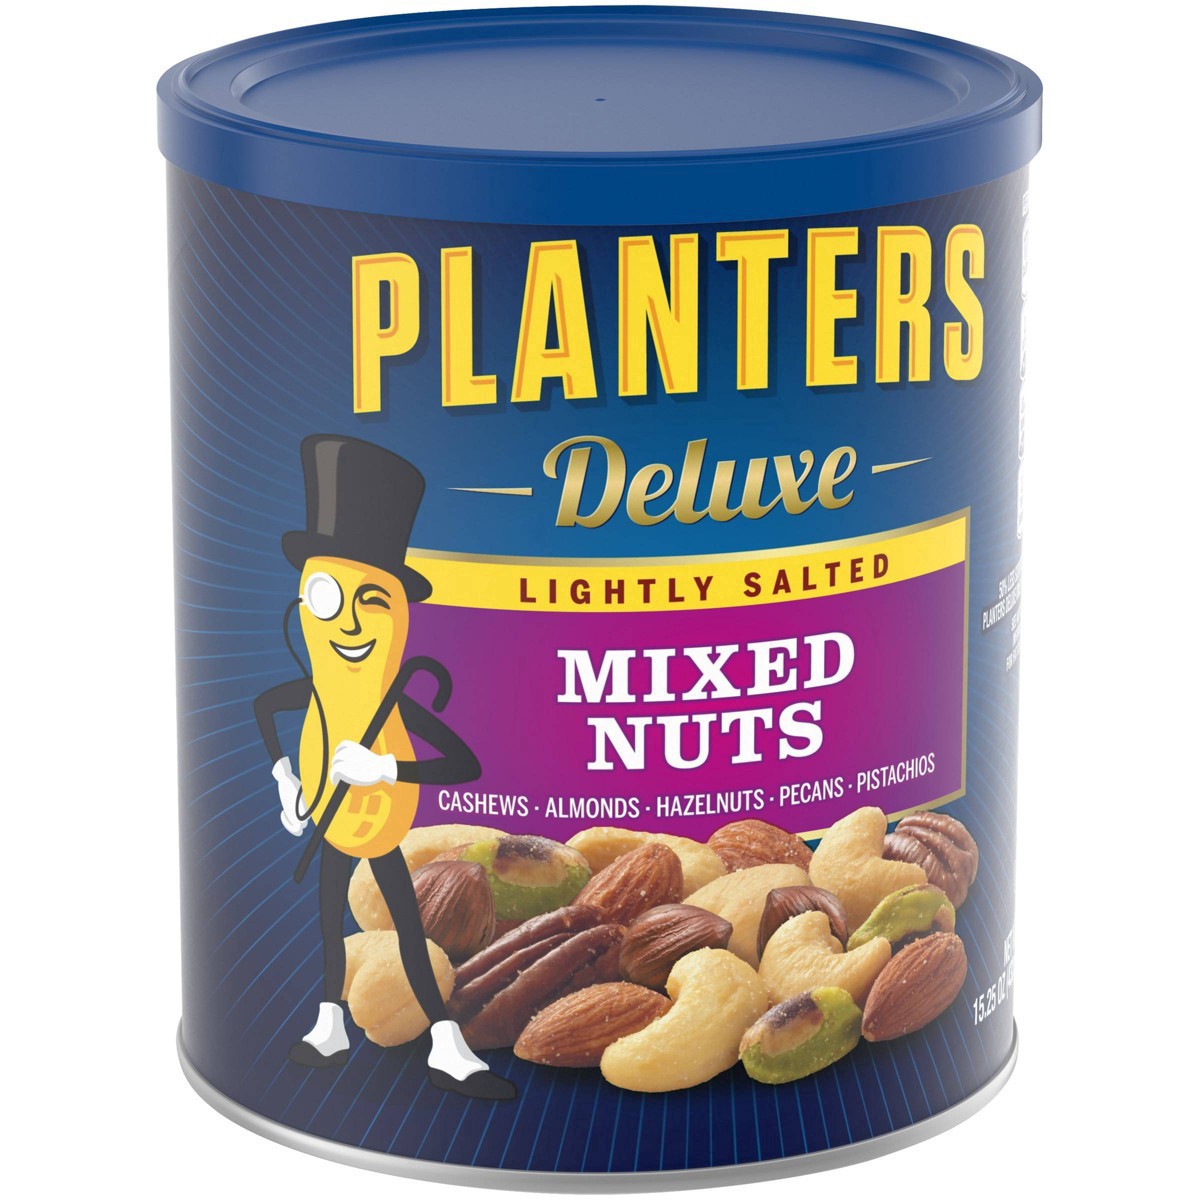 slide 4 of 46, Planters Deluxe Lightly Salted Mixed Nuts 15.25 oz, 15.25 oz